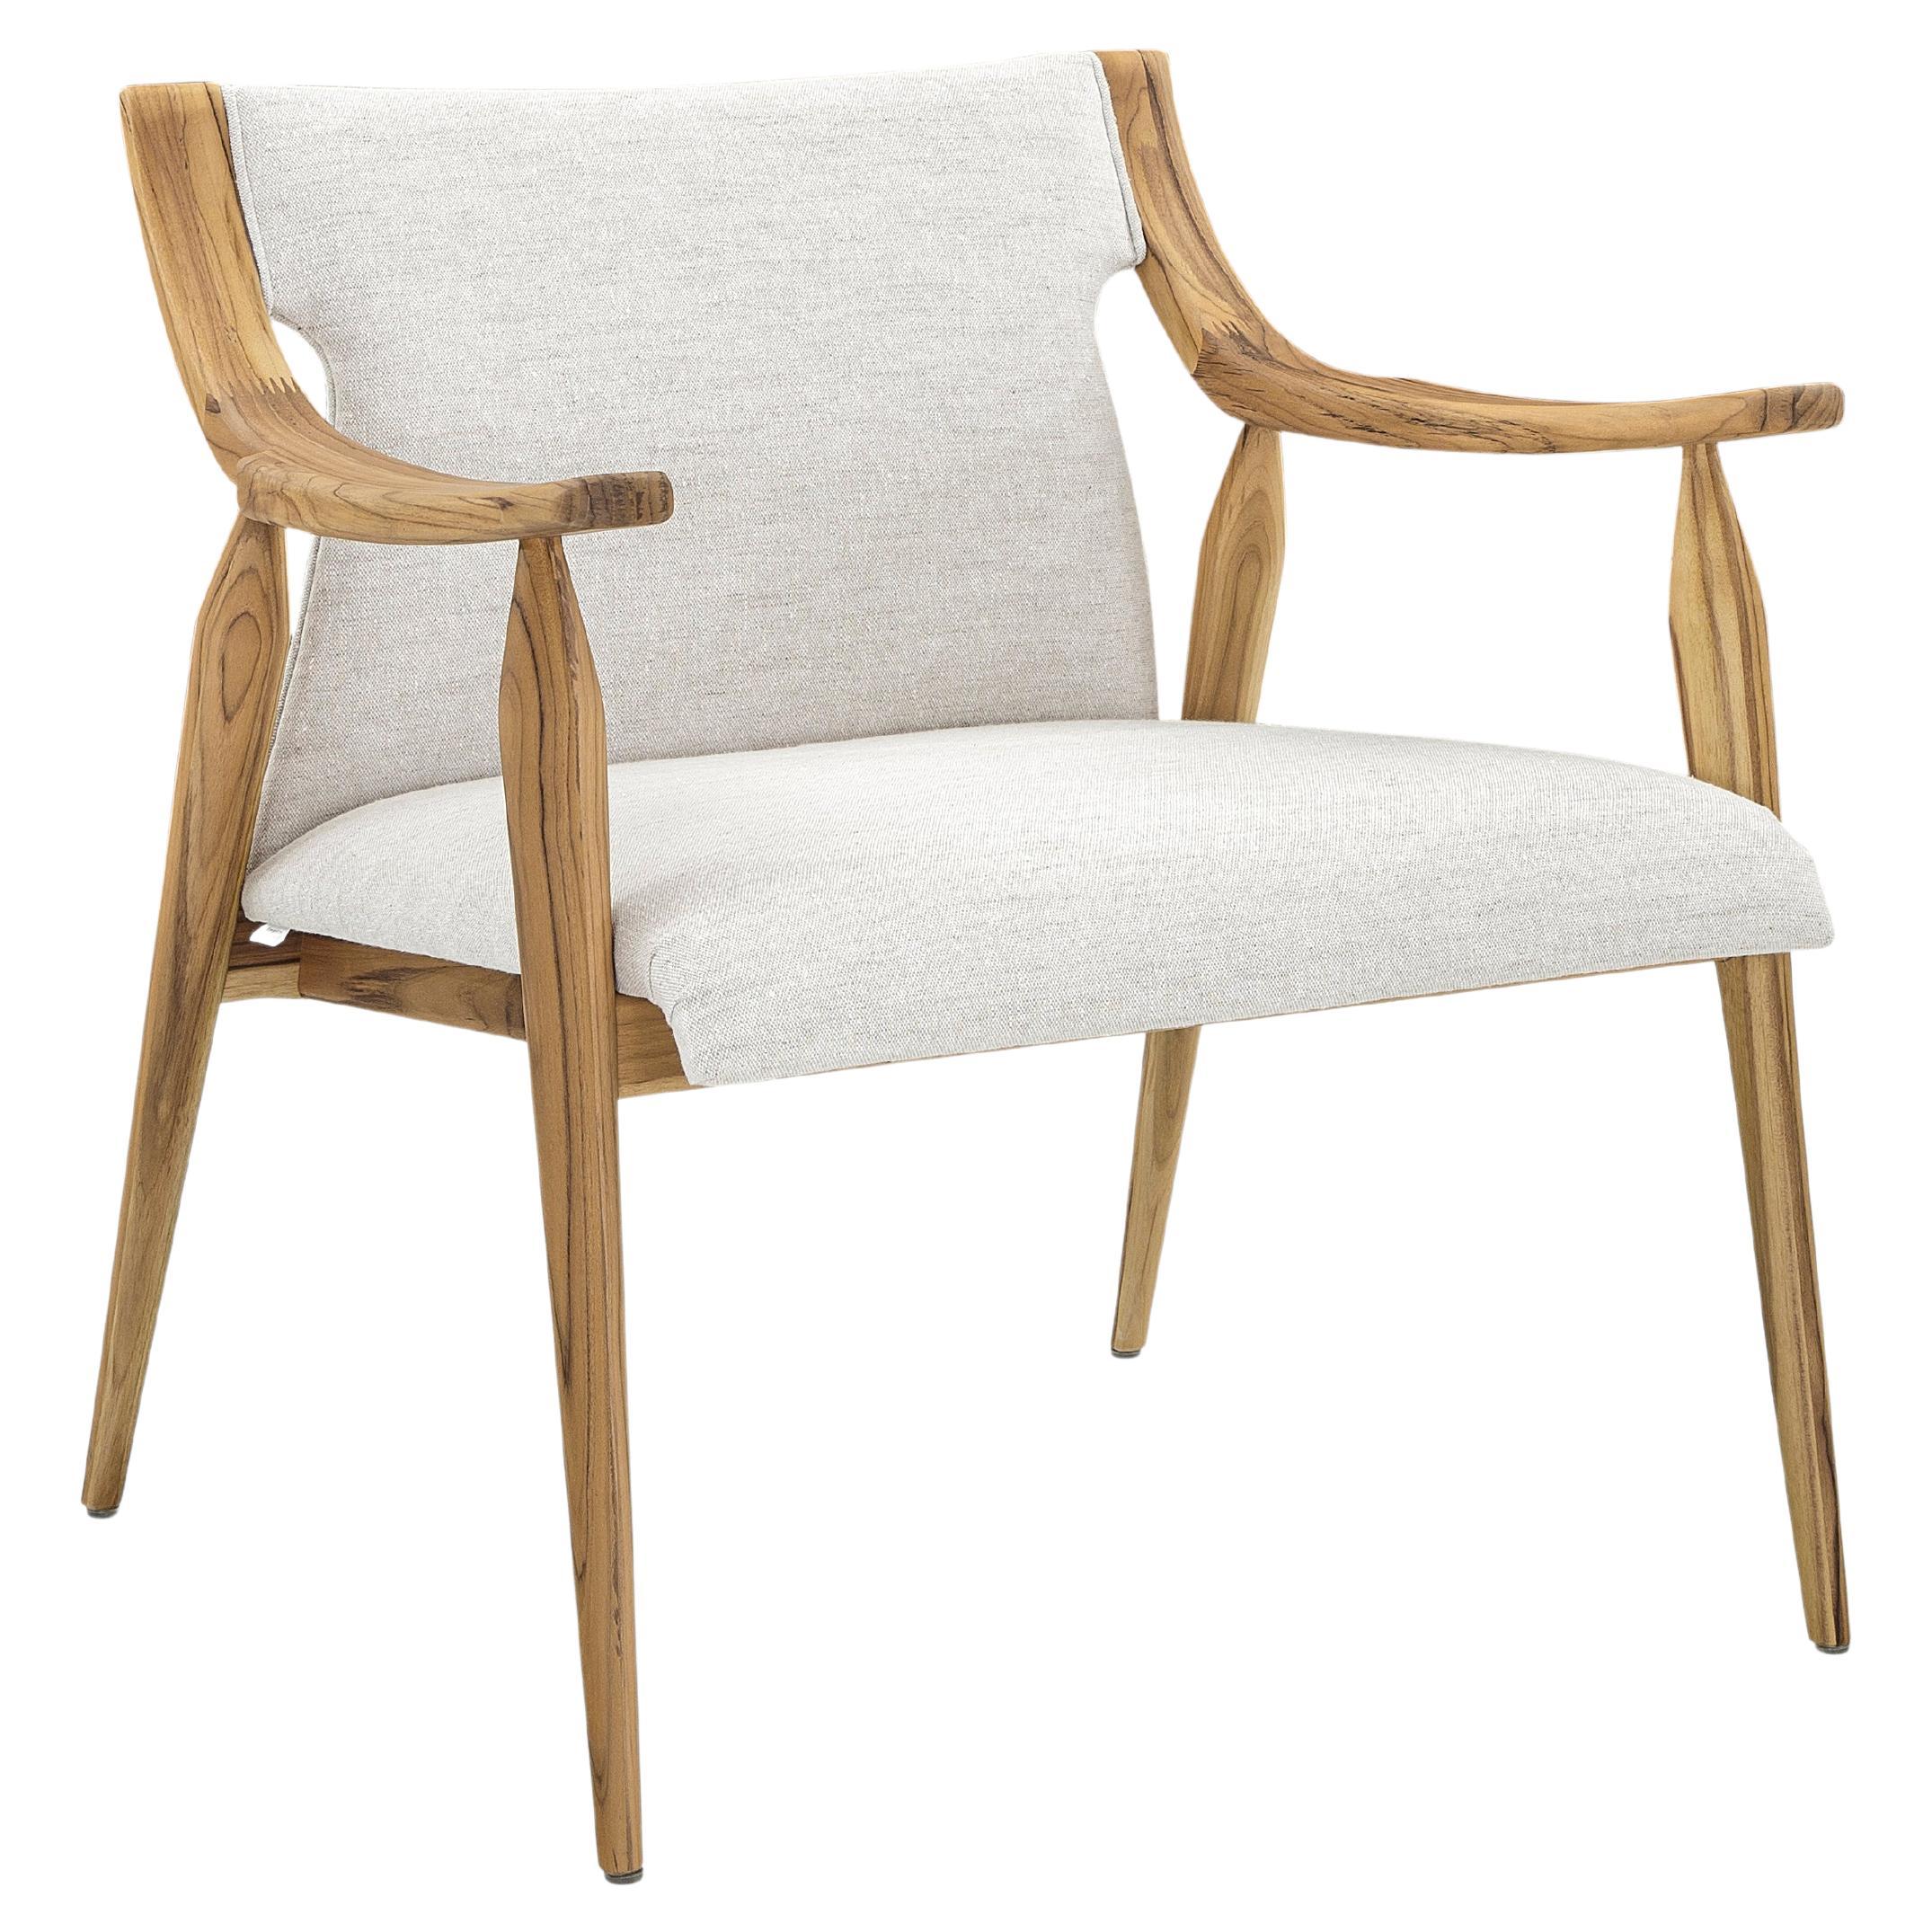 Mince Armchair Featuring Curved Arms and Spindle Legs in Teak Wood Finish For Sale